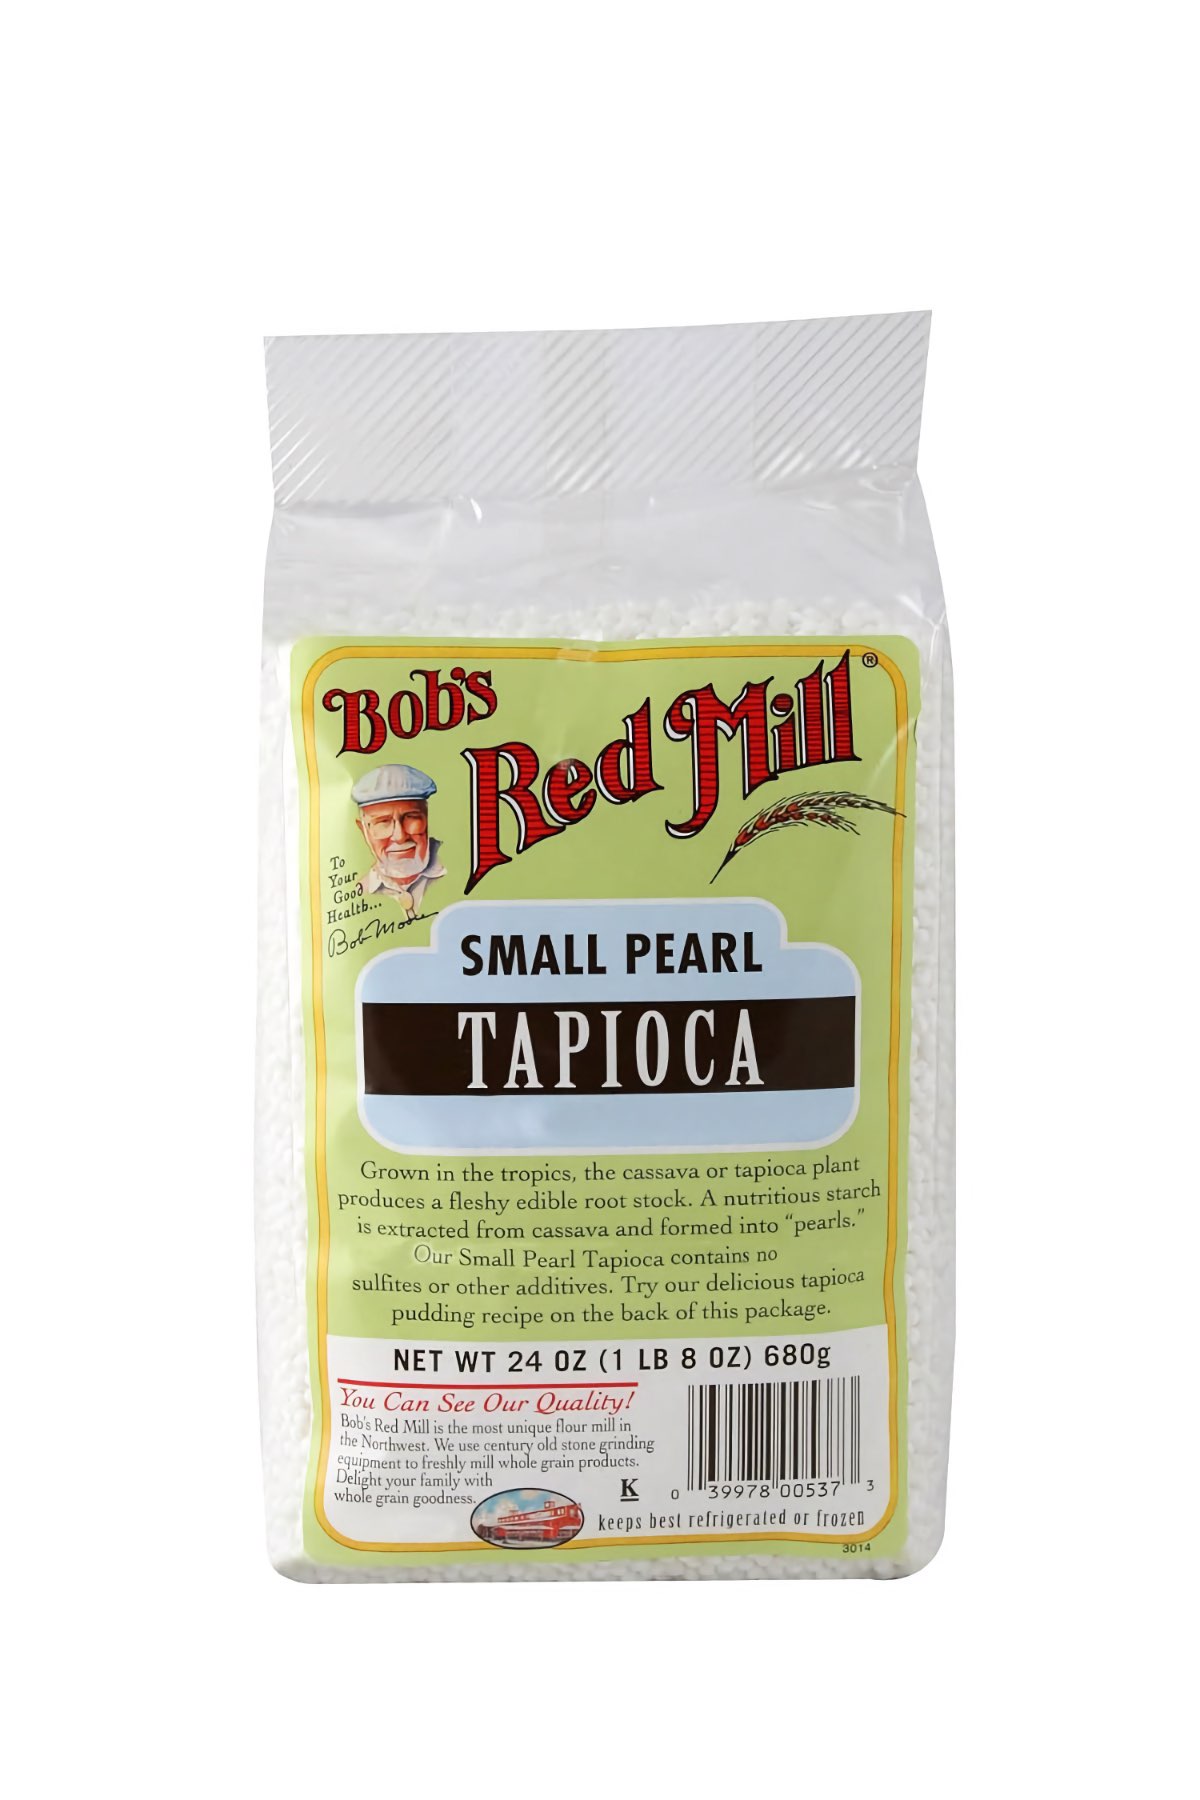 A bag of small pearl tapioca from Bob's Red Mill.